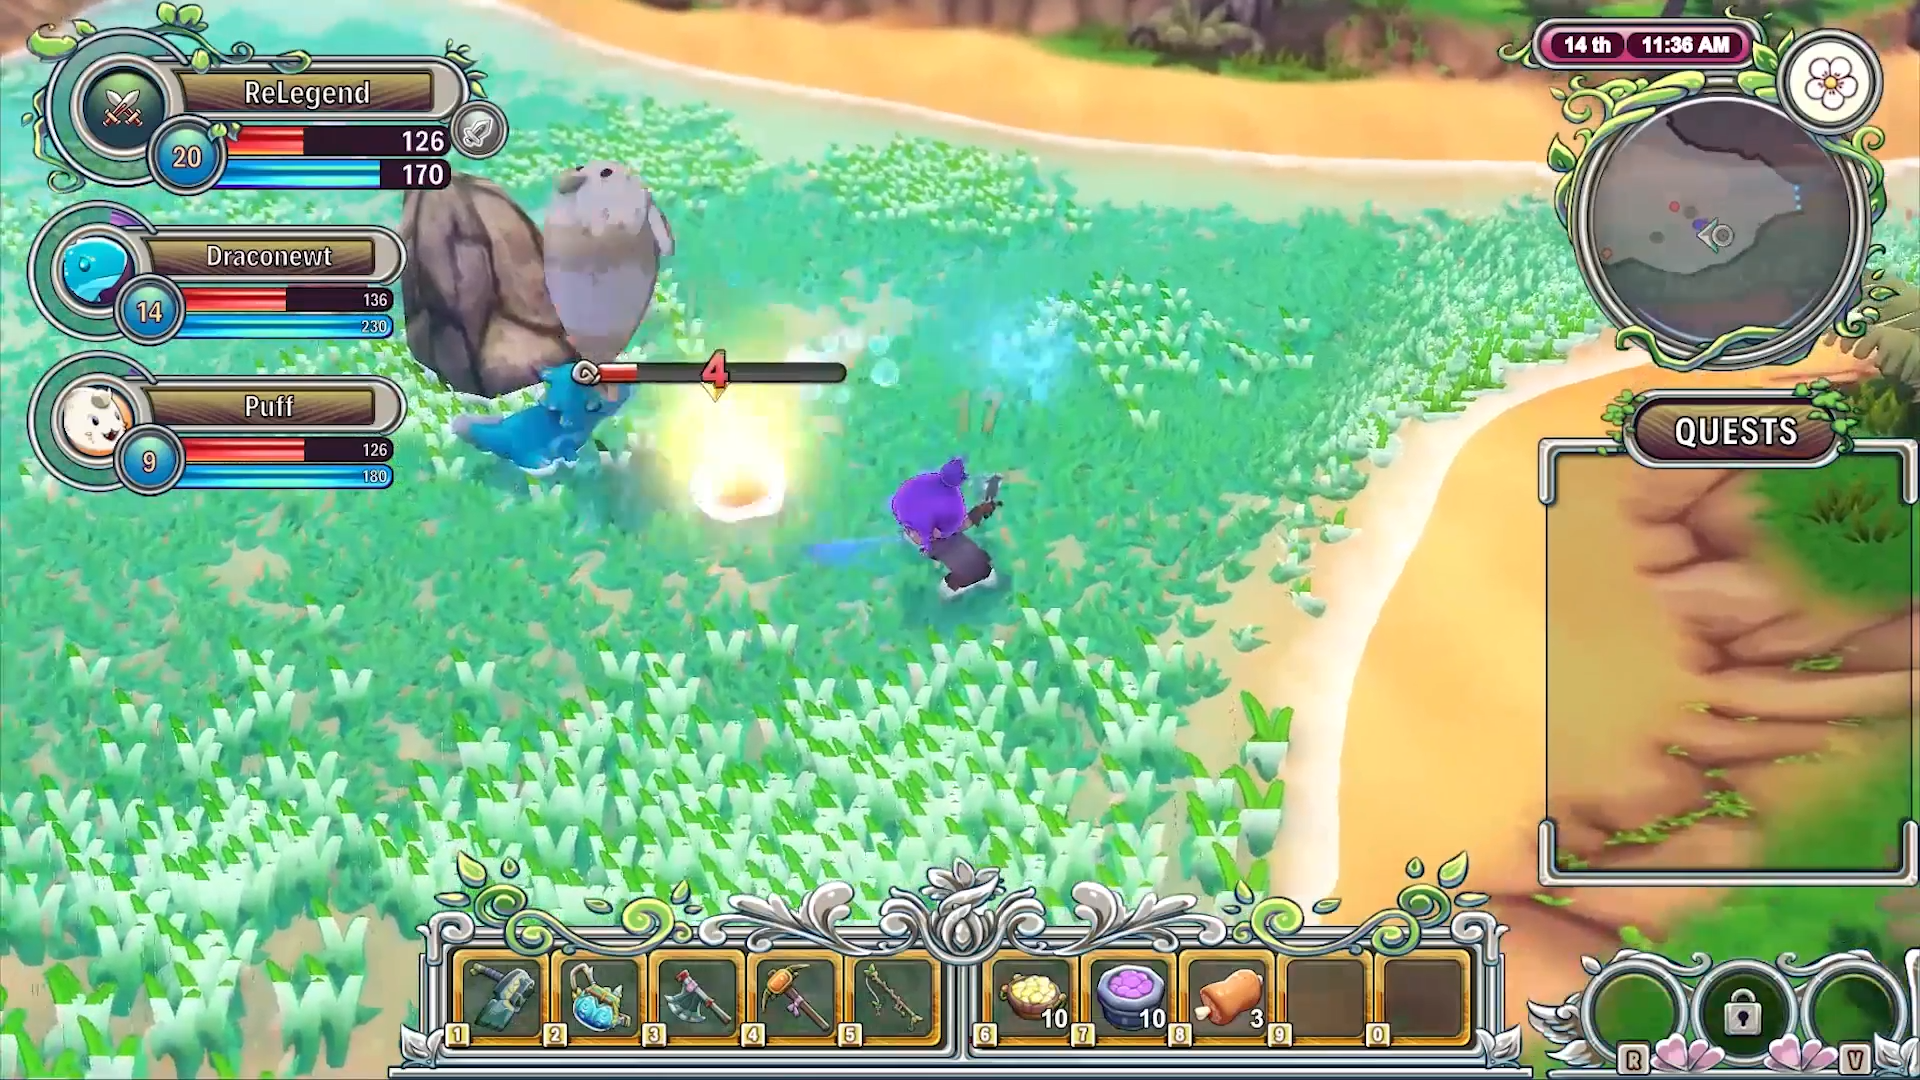 MONSTER-RAISING ADVENTURE GAME 'RE:LEGEND' COMING TO EARLY ACCESS